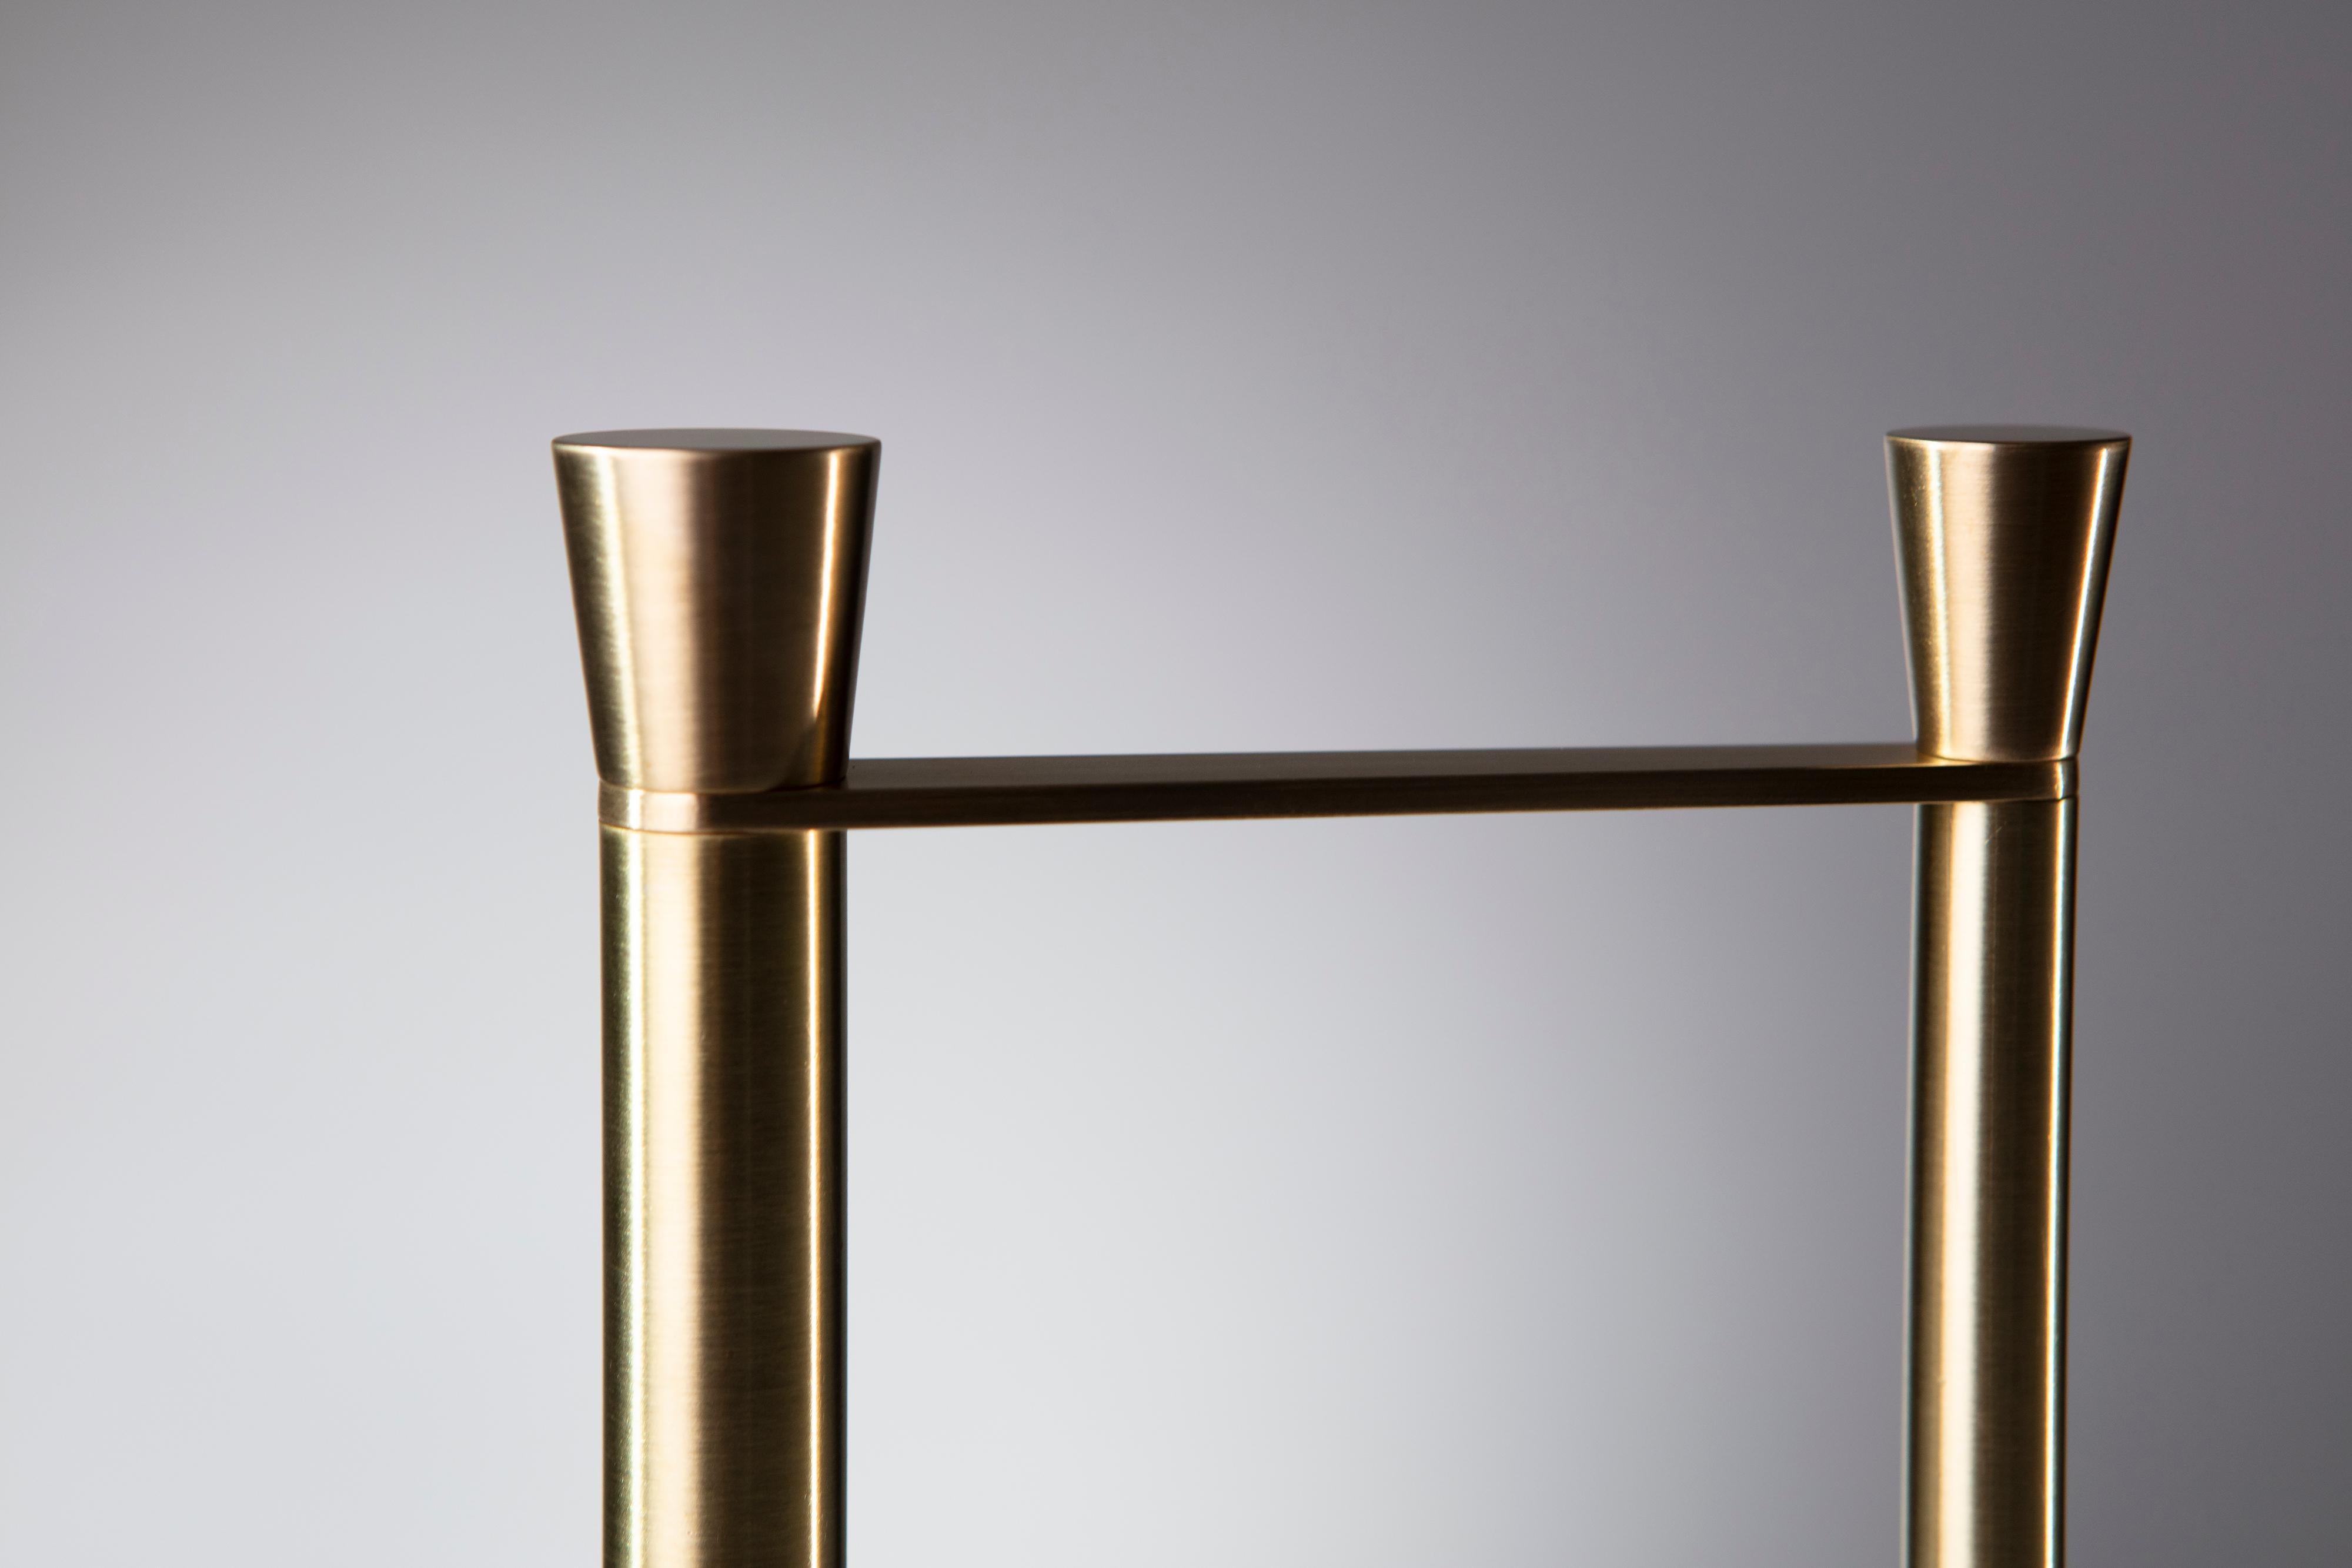 American Brass and Walnut Paper Towel Holder